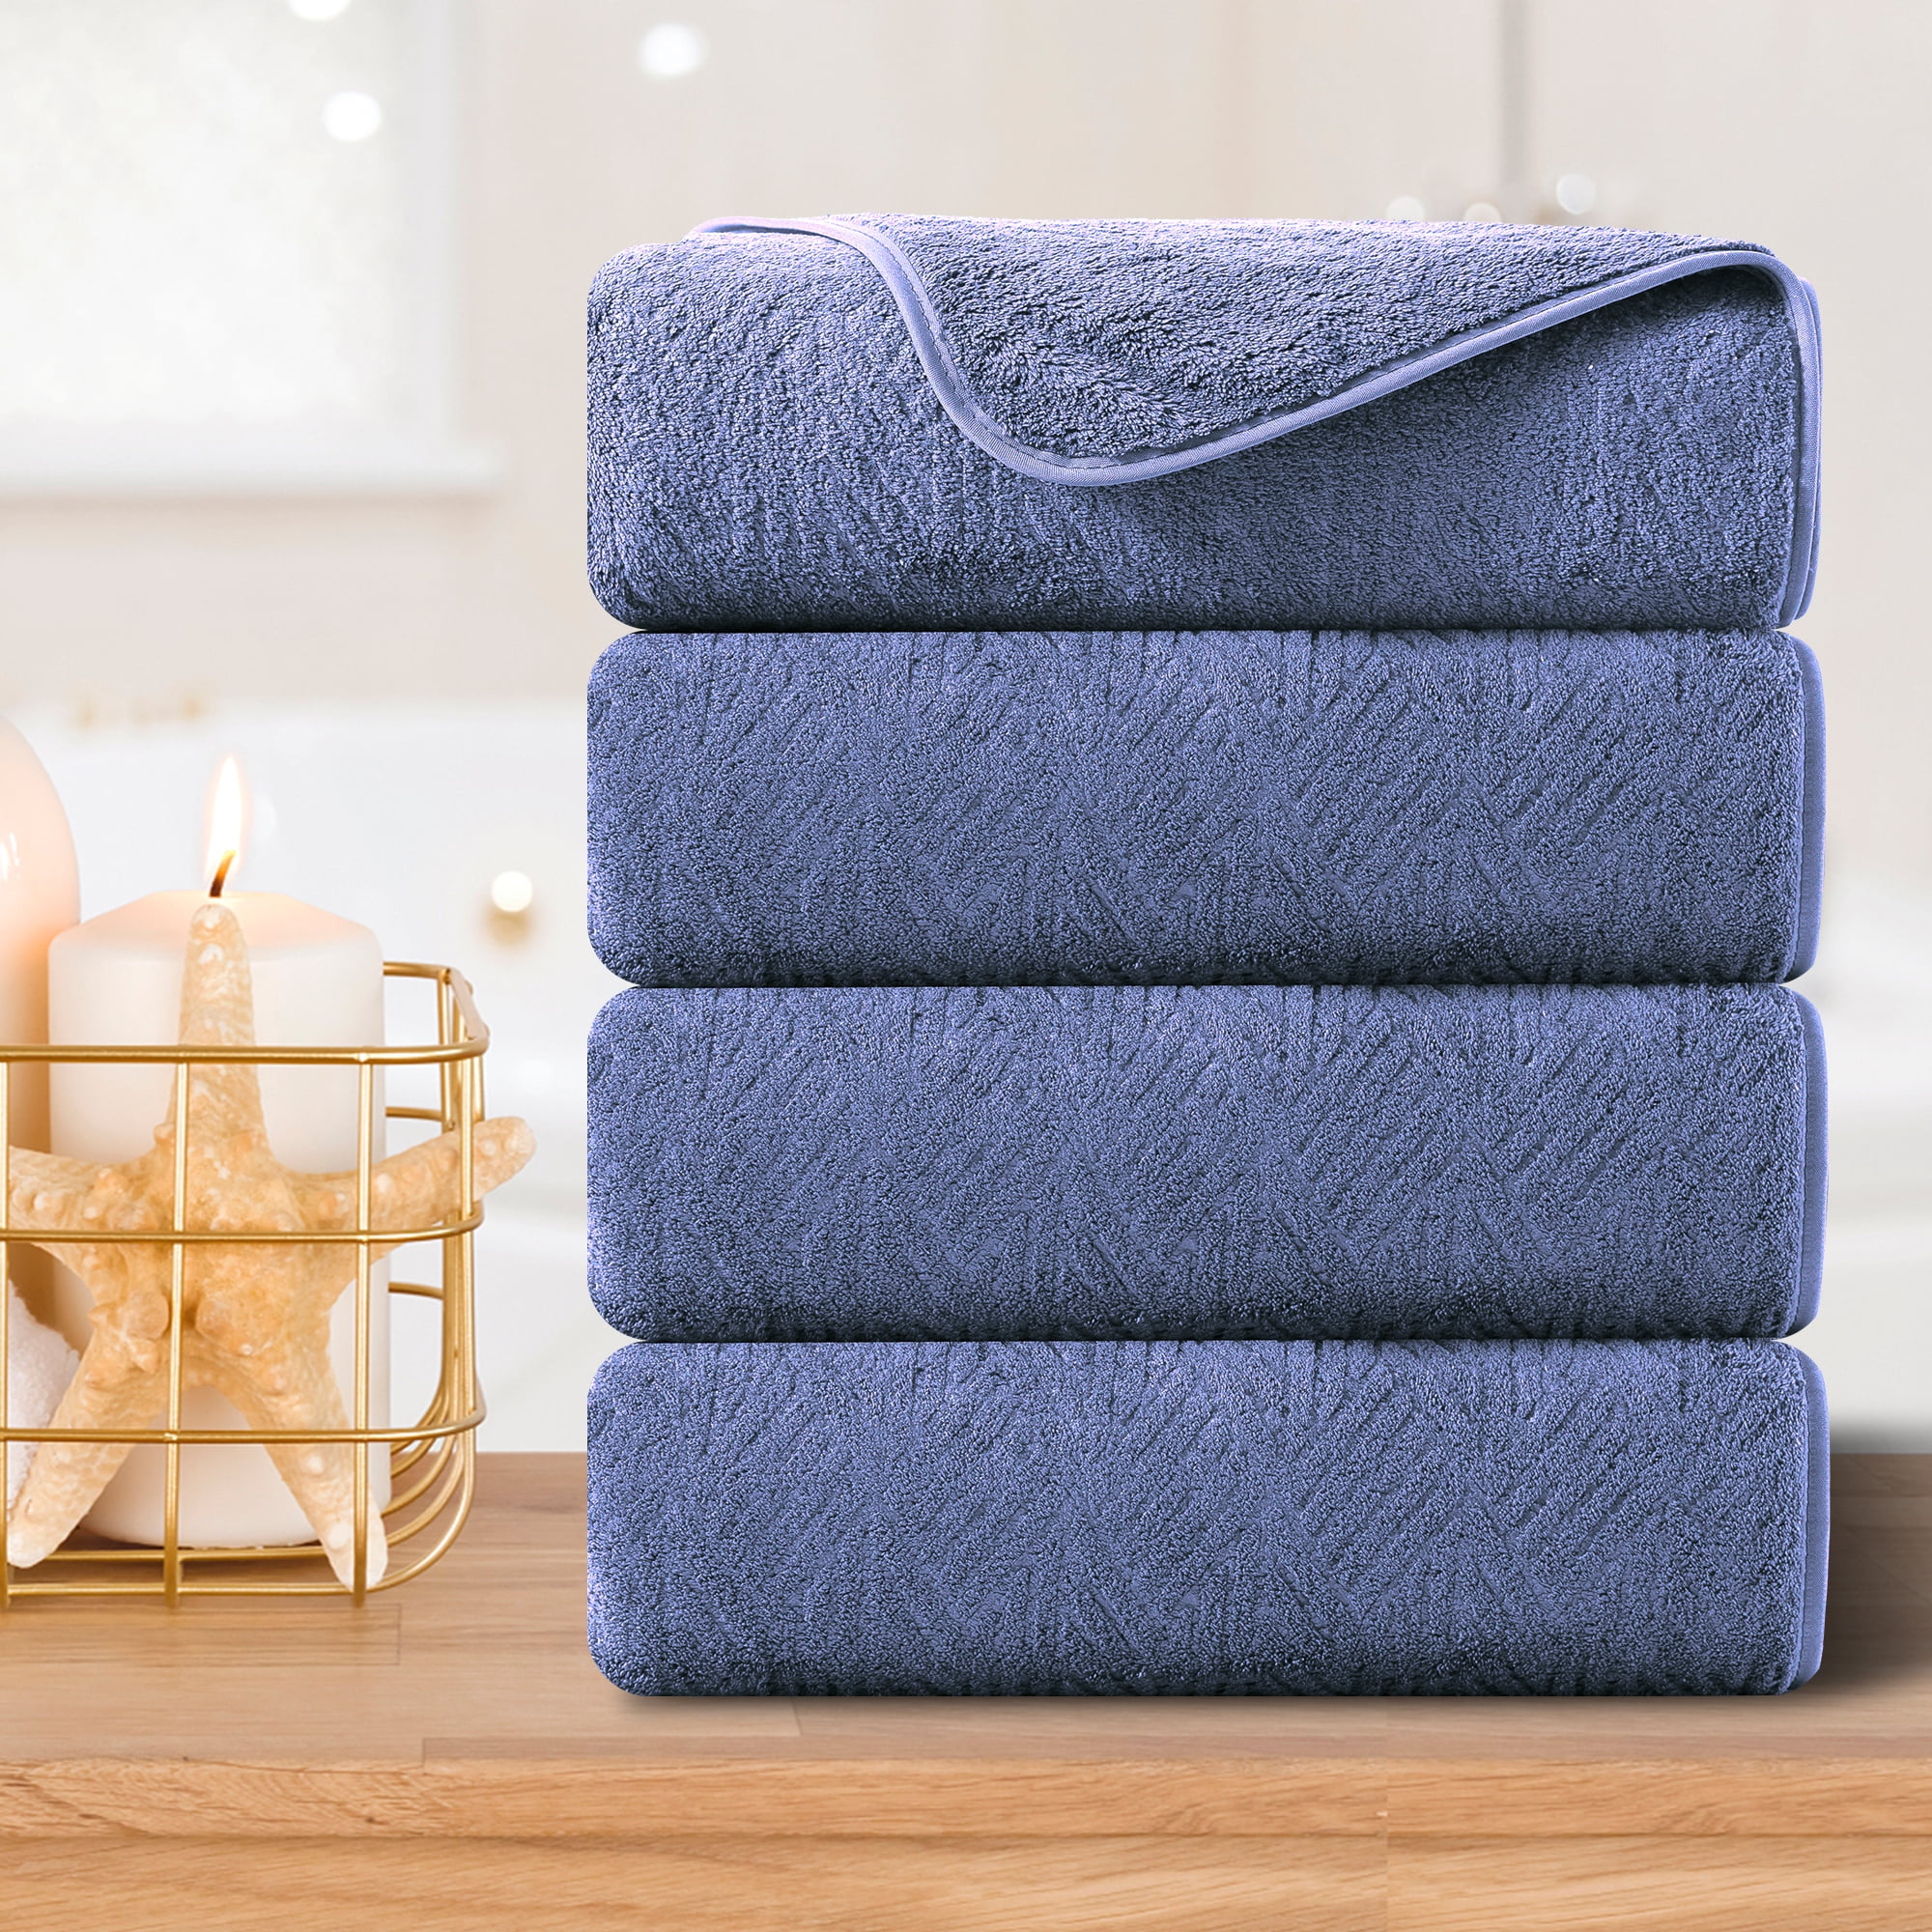 Smuge 4 Pack Oversized Bath Sheet Towels (35 x 70 in,Black) 700 GSM Ultra  Soft Large Bath Towel Set Thick Cozy Quick Dry Bathroom Towels Hotel